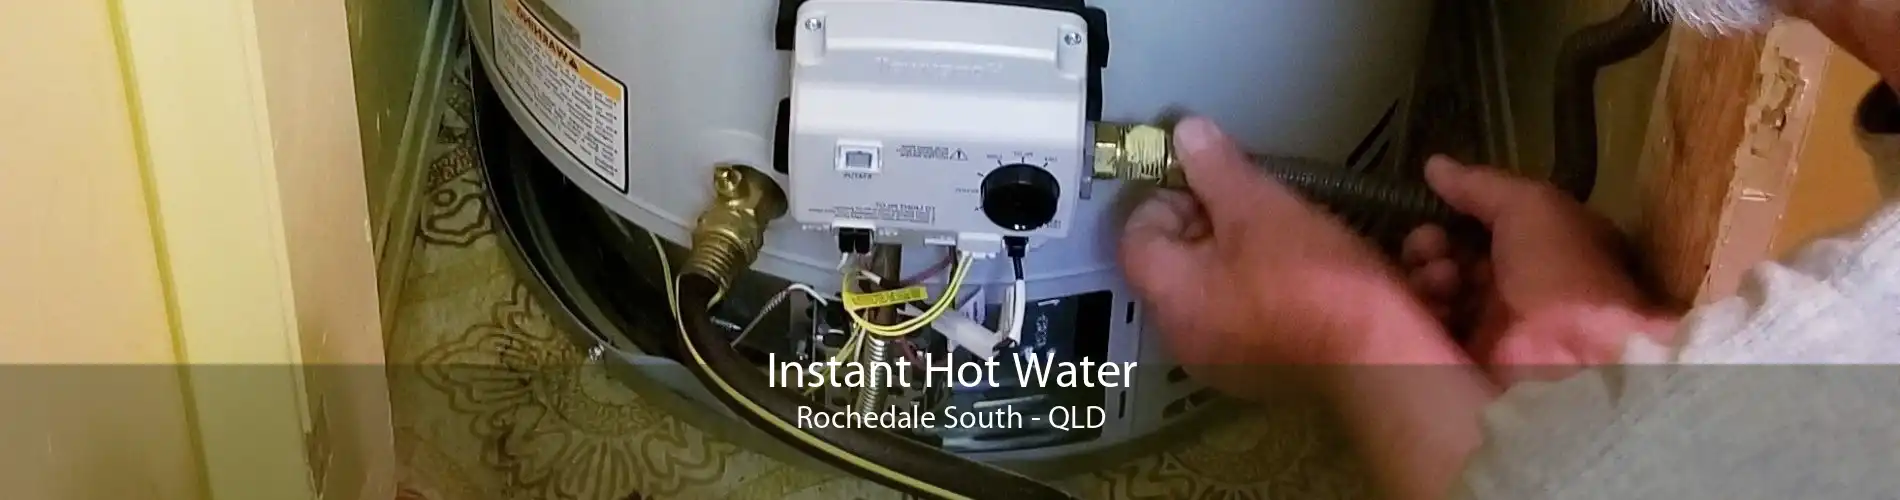 Instant Hot Water Rochedale South - QLD